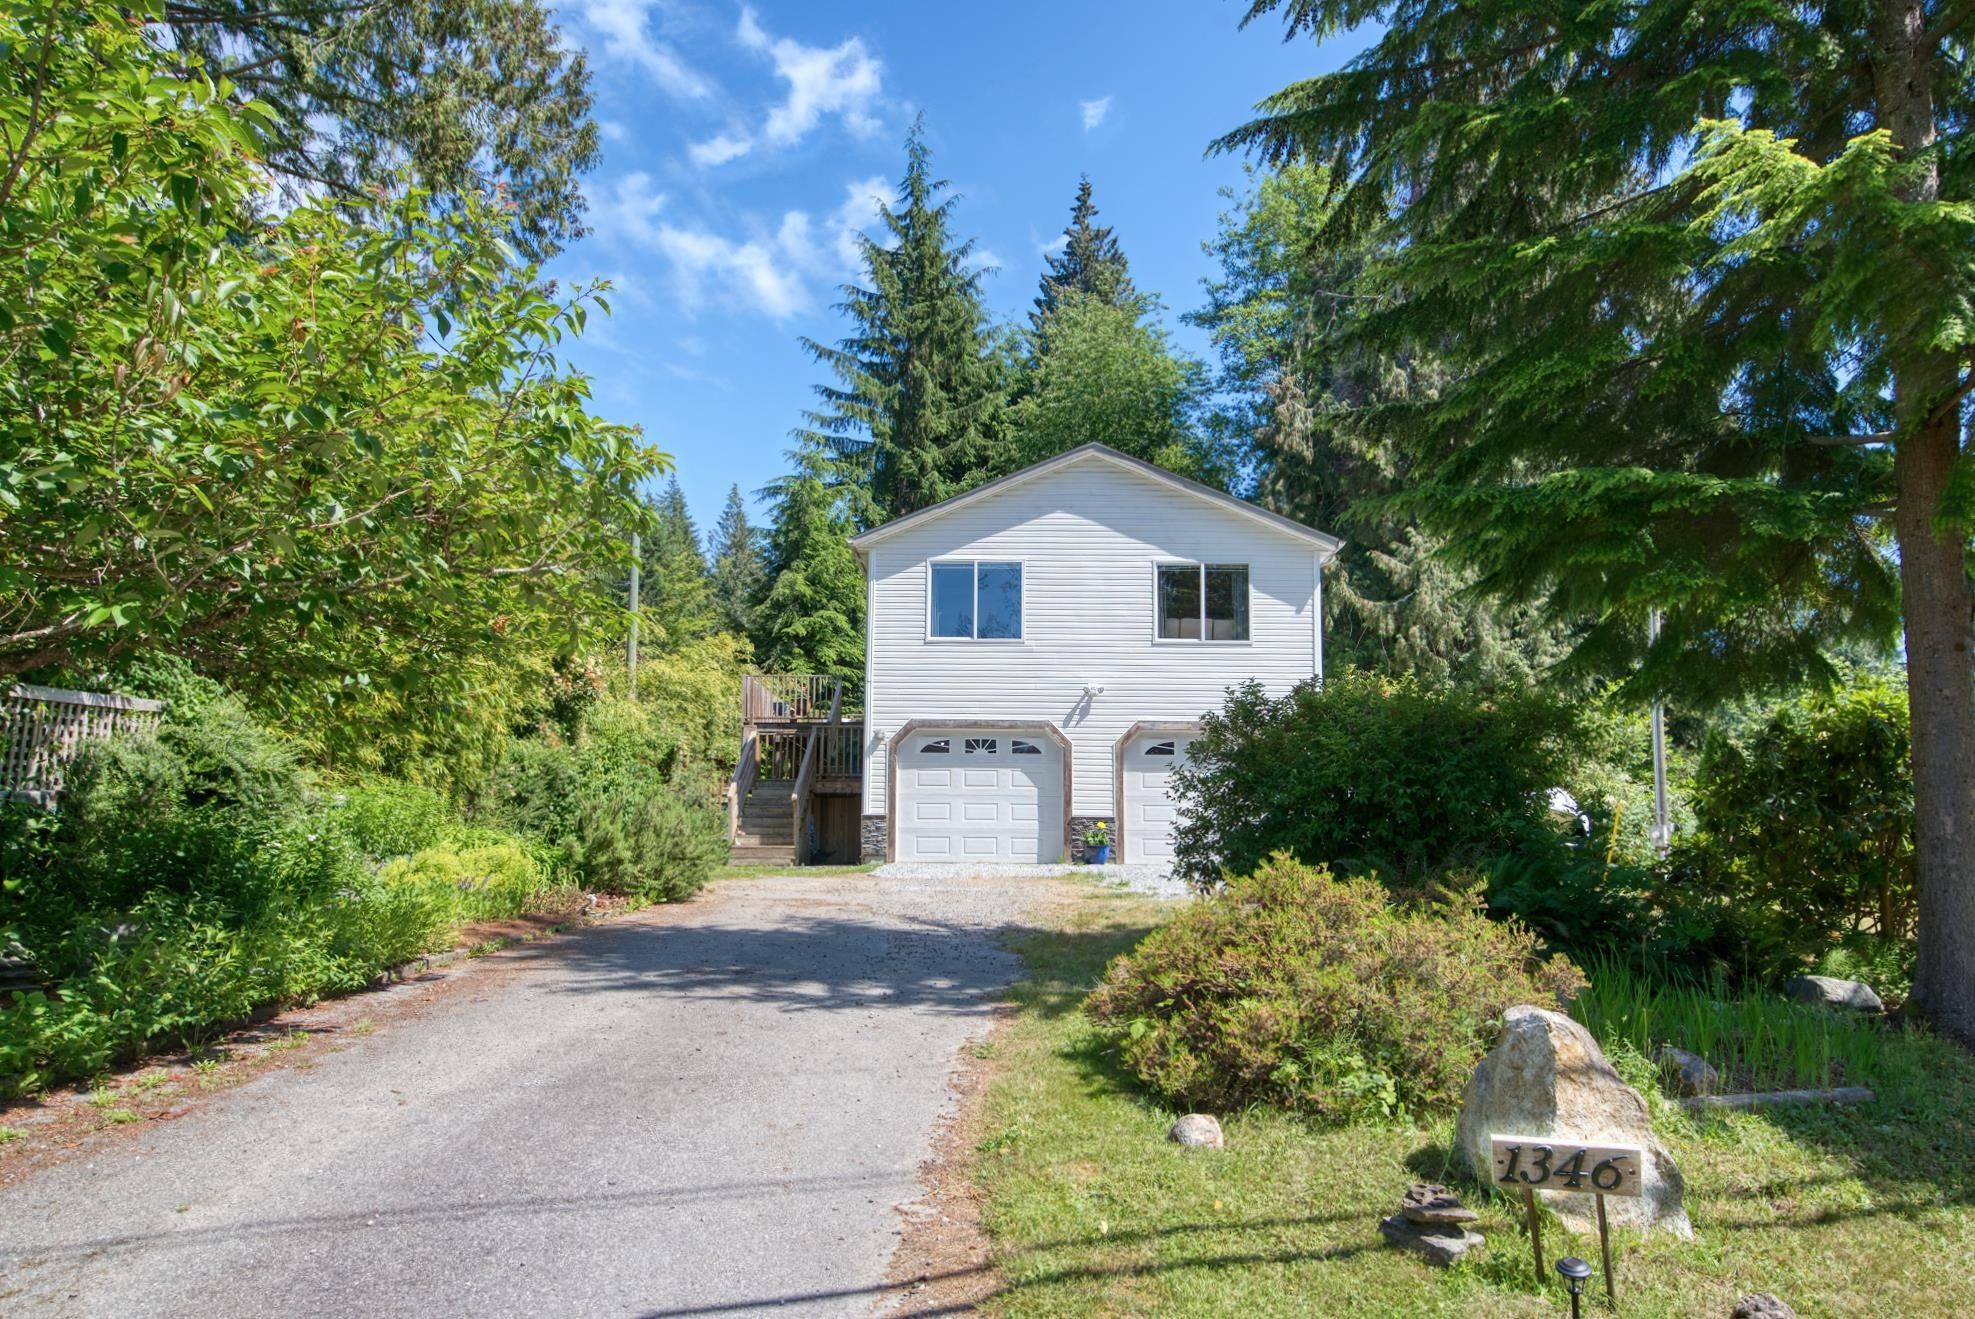 I have sold a property at 1346 MARLENE RD in Roberts Creek
